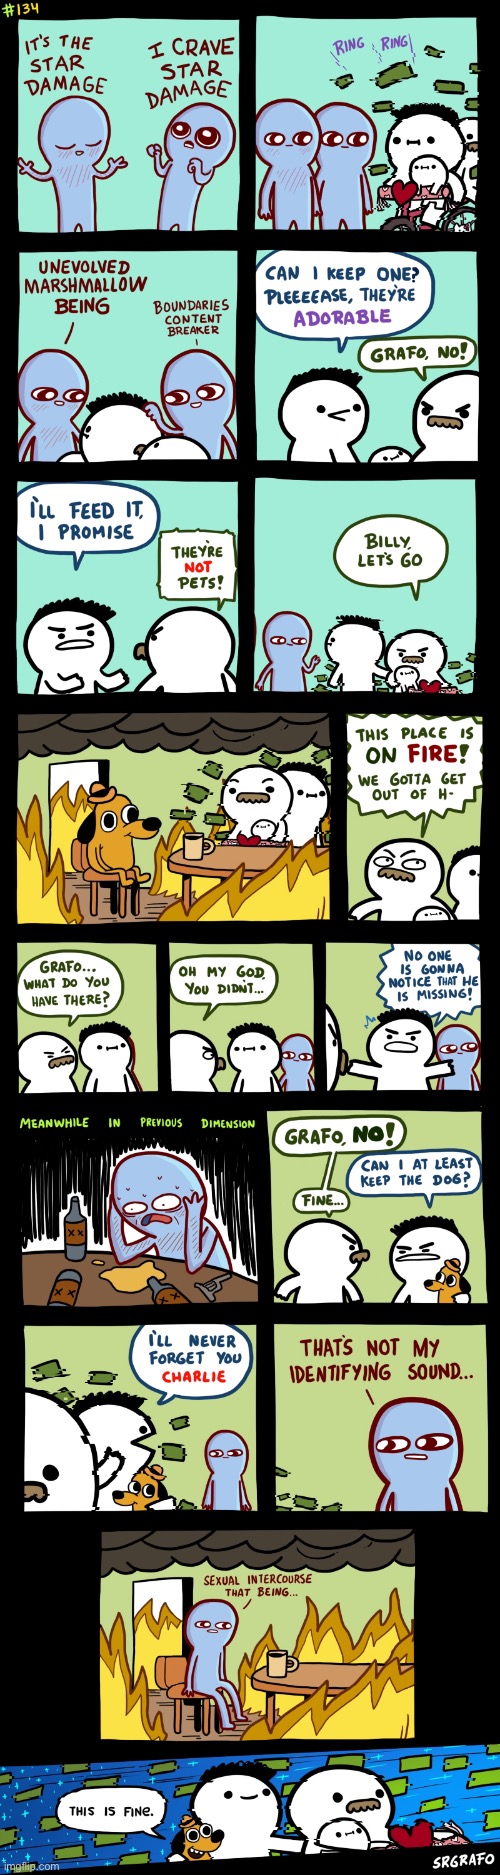 #1,860 | image tagged in comics/cartoons,comics,srgrafo 152,travel,memes,this is fine | made w/ Imgflip meme maker